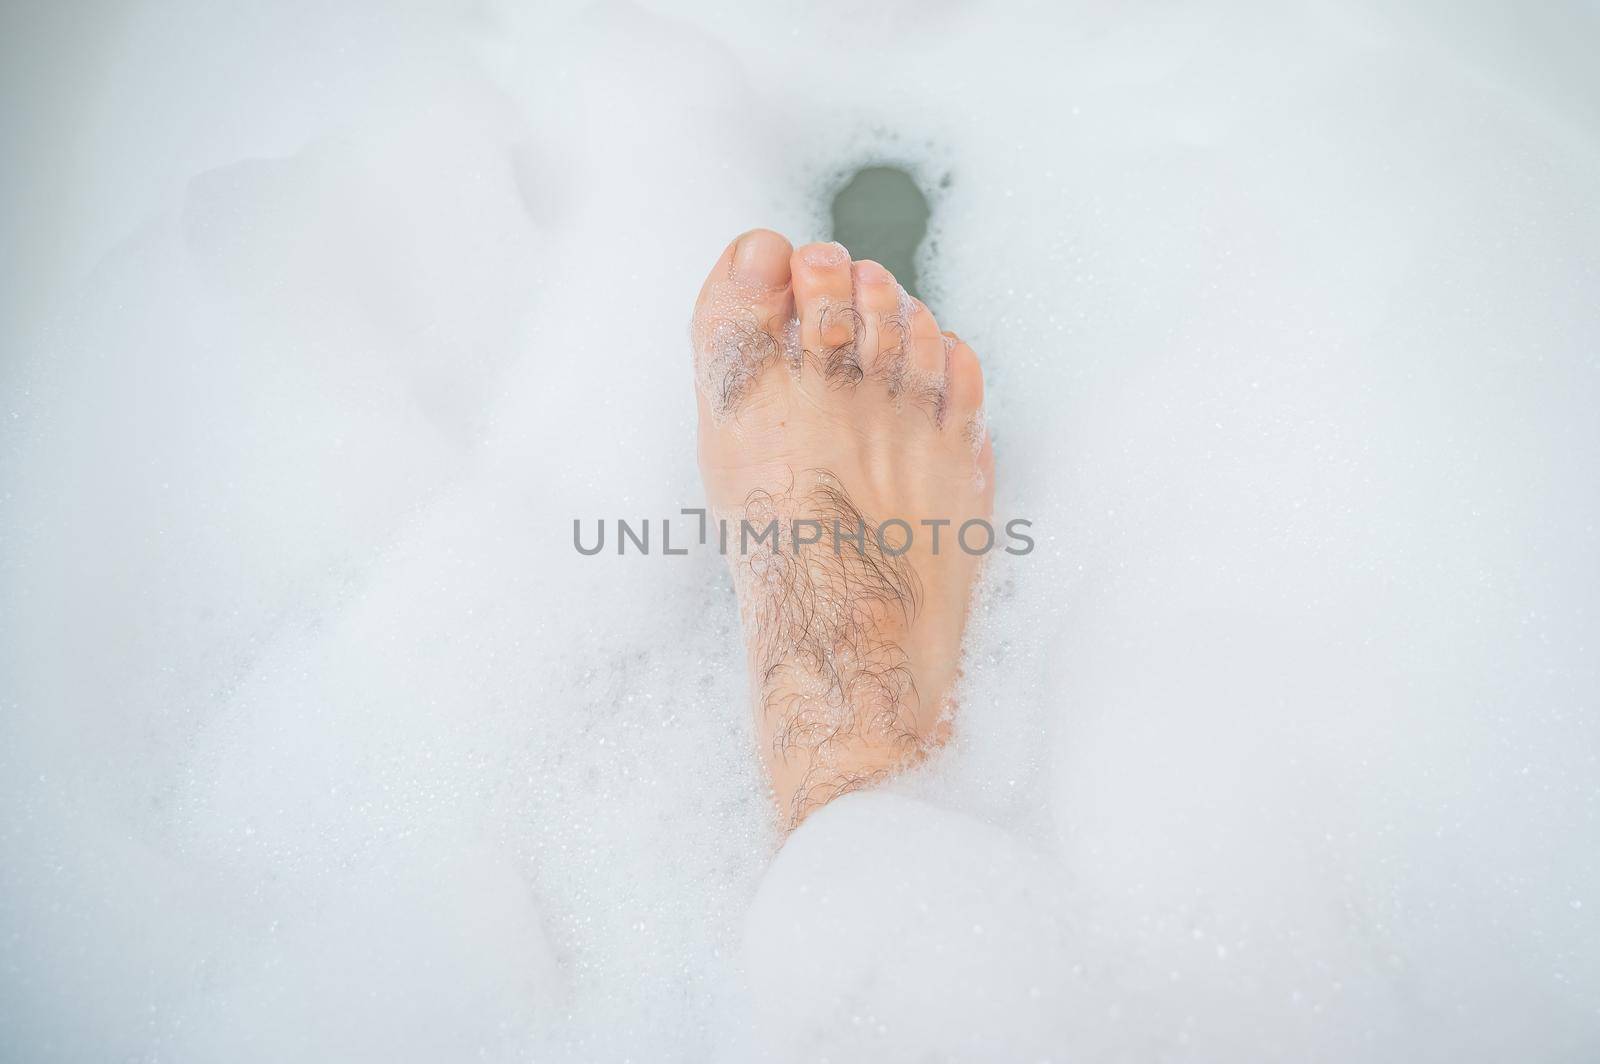 Funny picture of a man taking a relaxing bath. Close-up of male feet in a bubble bath.